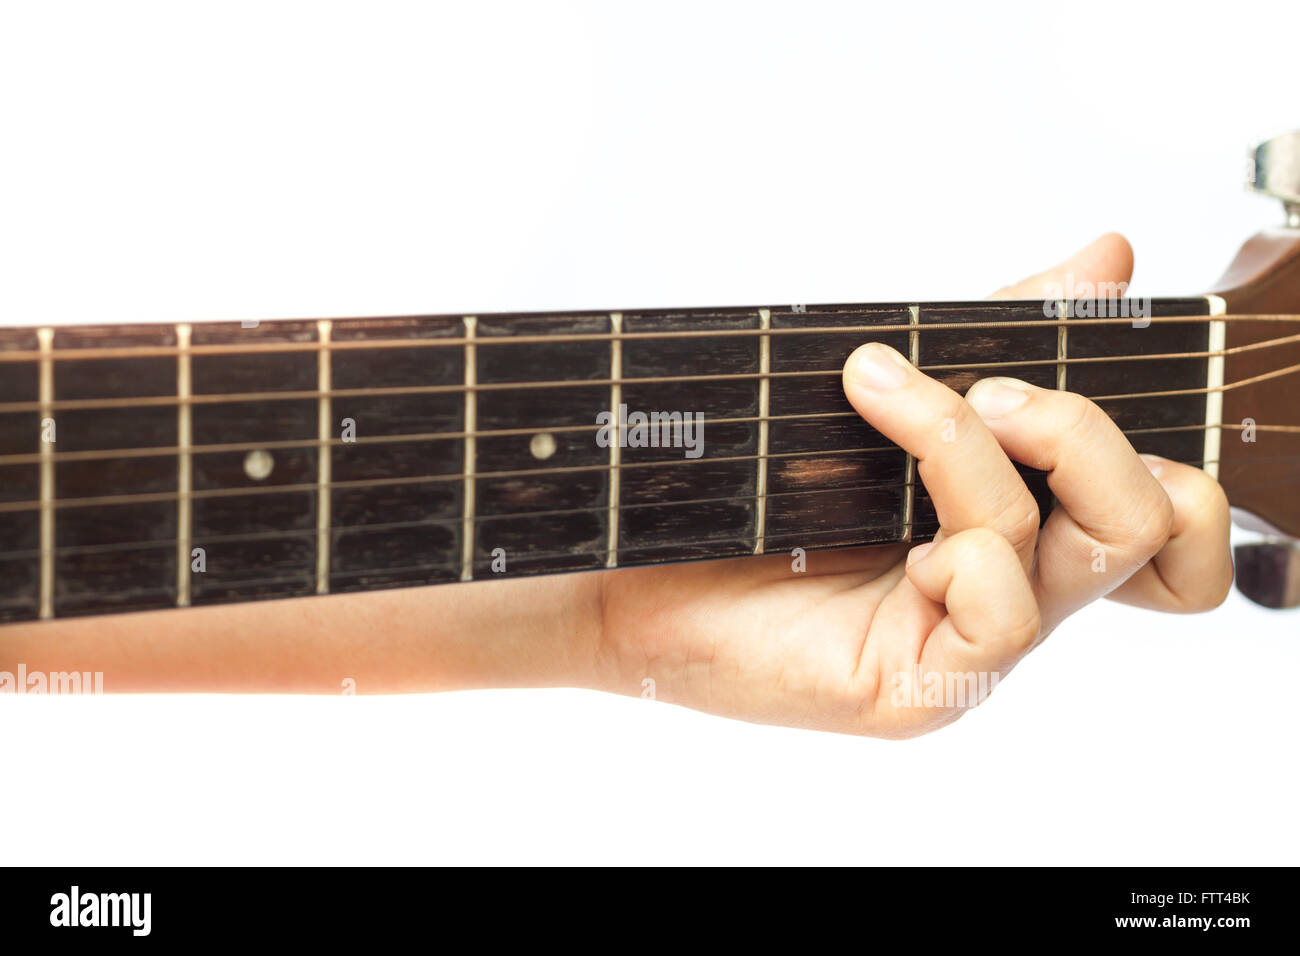 Woman's hands playing acoustic guitar, stock photo Stock Photo